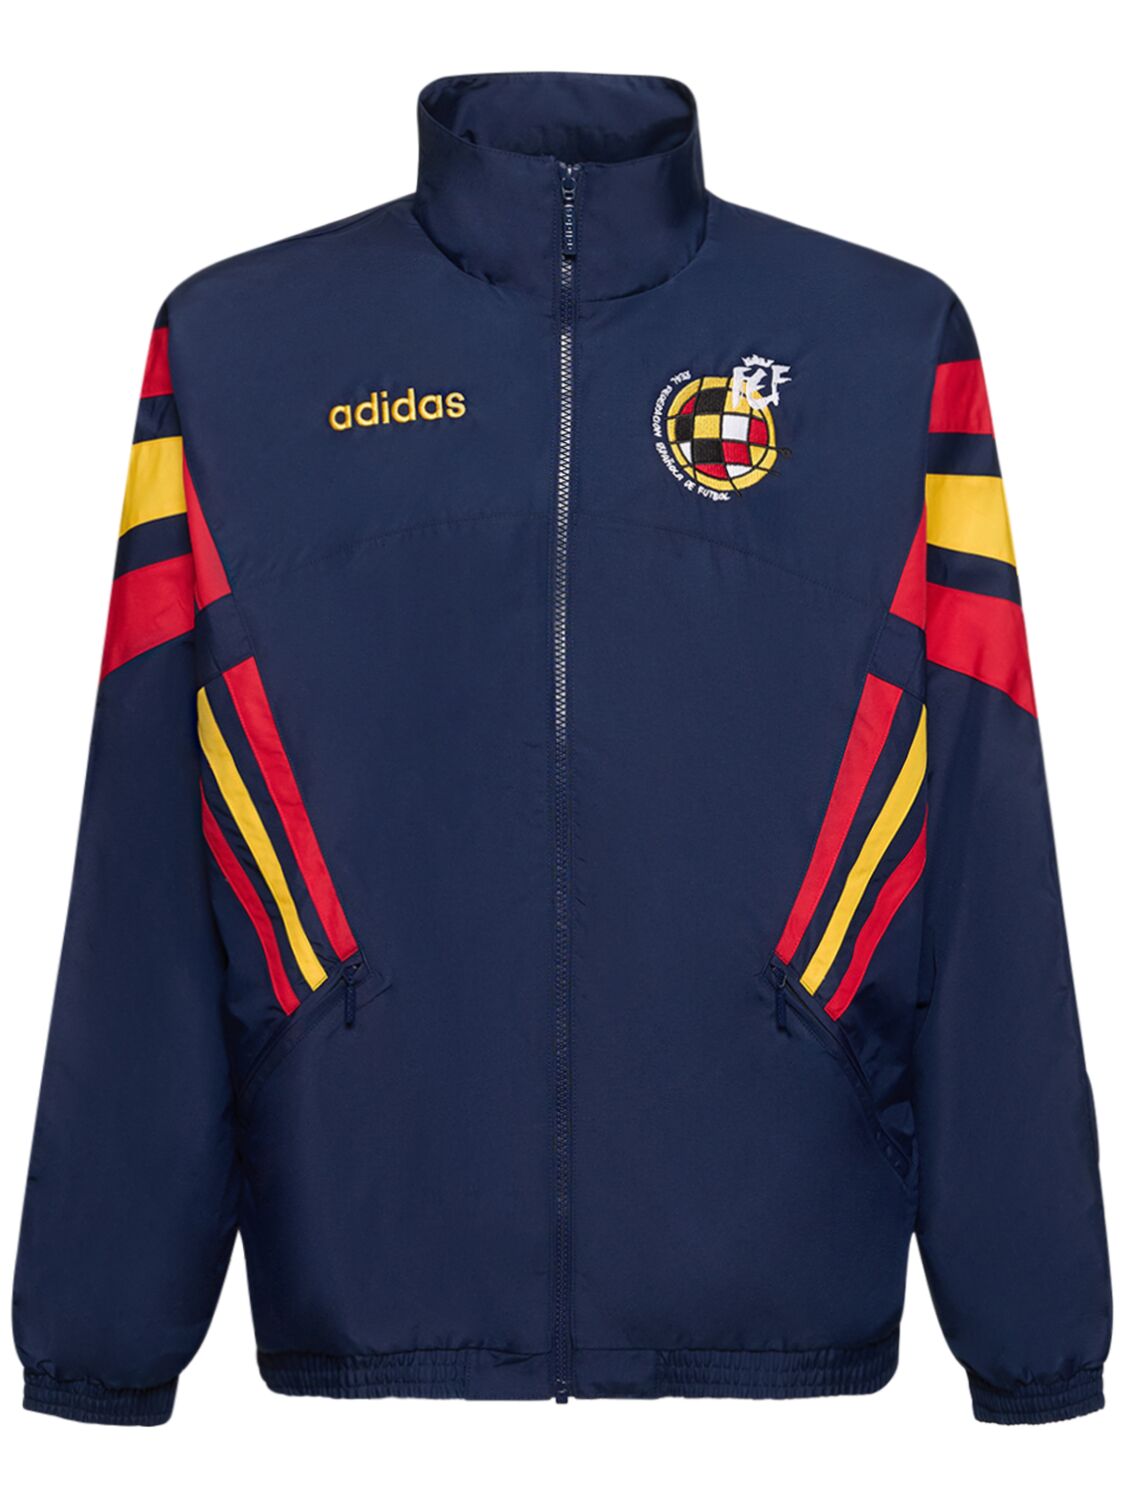 Image of Spain 96 Track Top